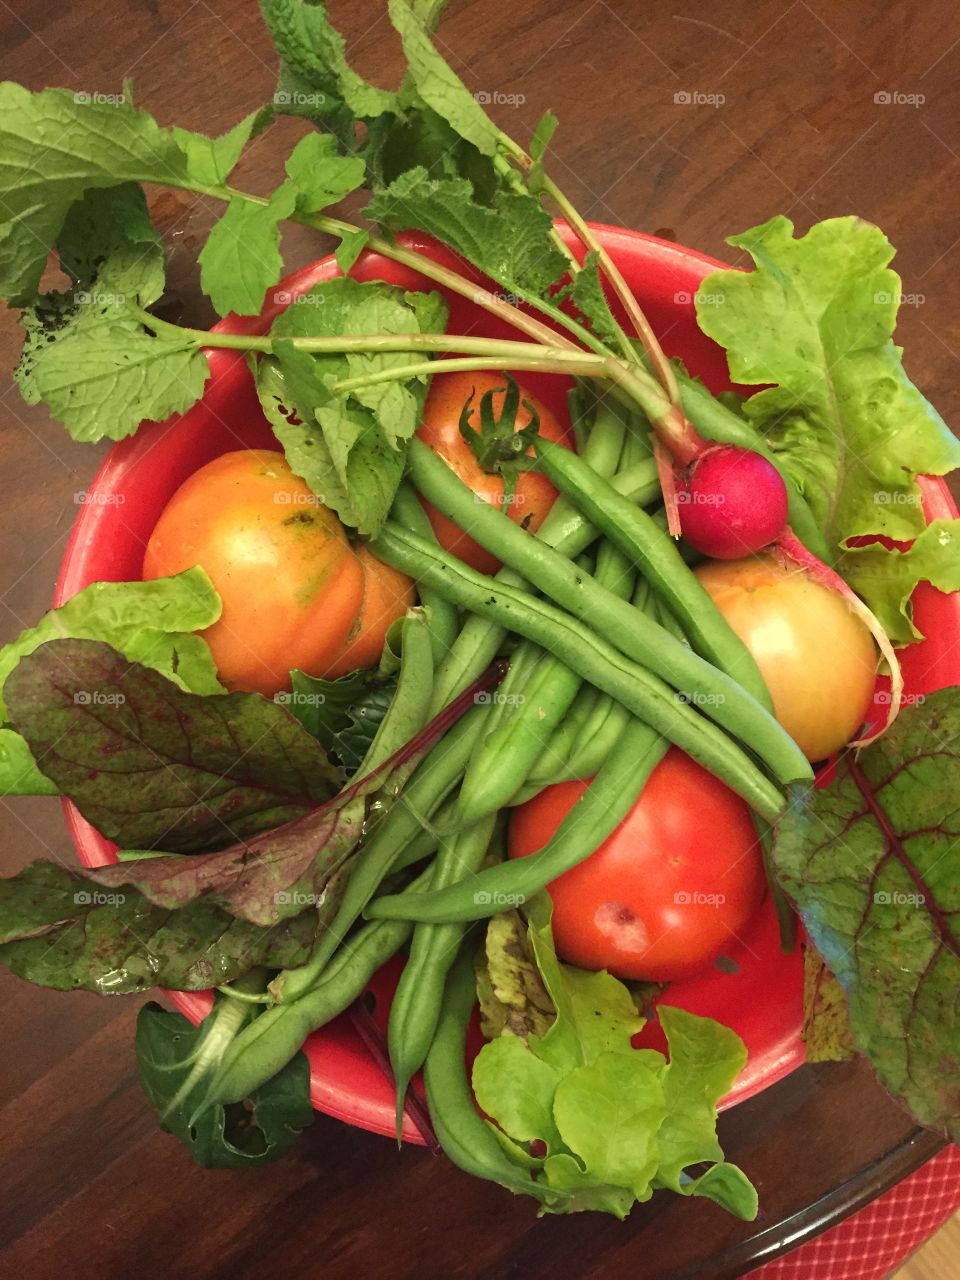 A bounty of beautiful colored vegetables, some radishes and the fruit of the tomato. 